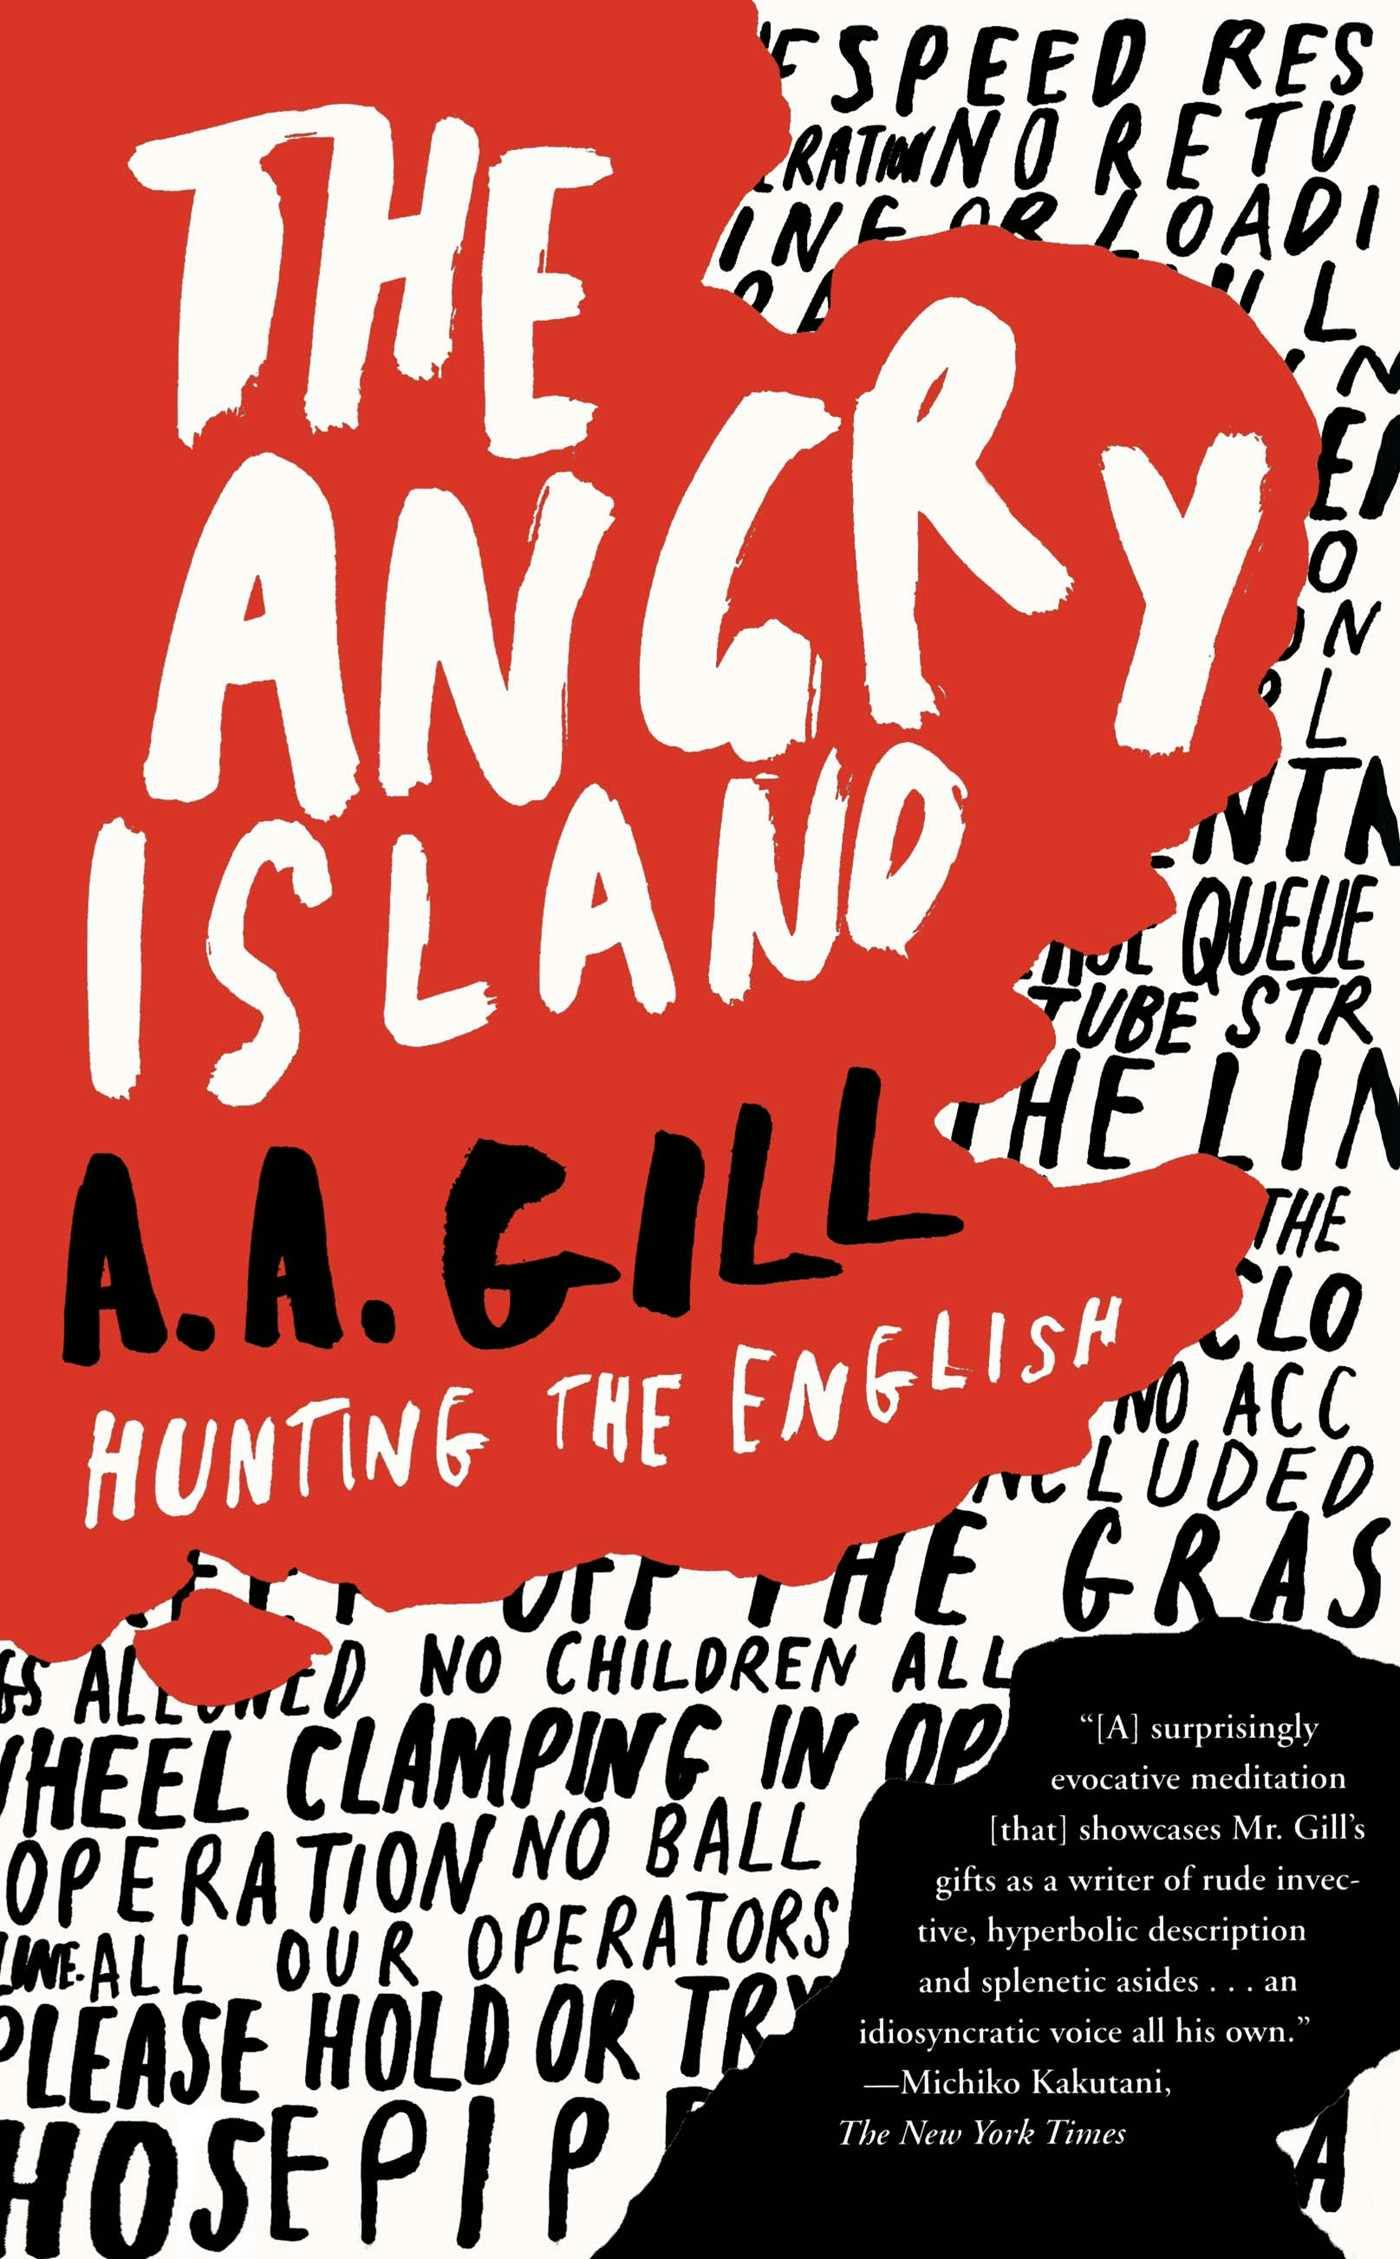 The Angry Island: Hunting the English - A.A. Gill